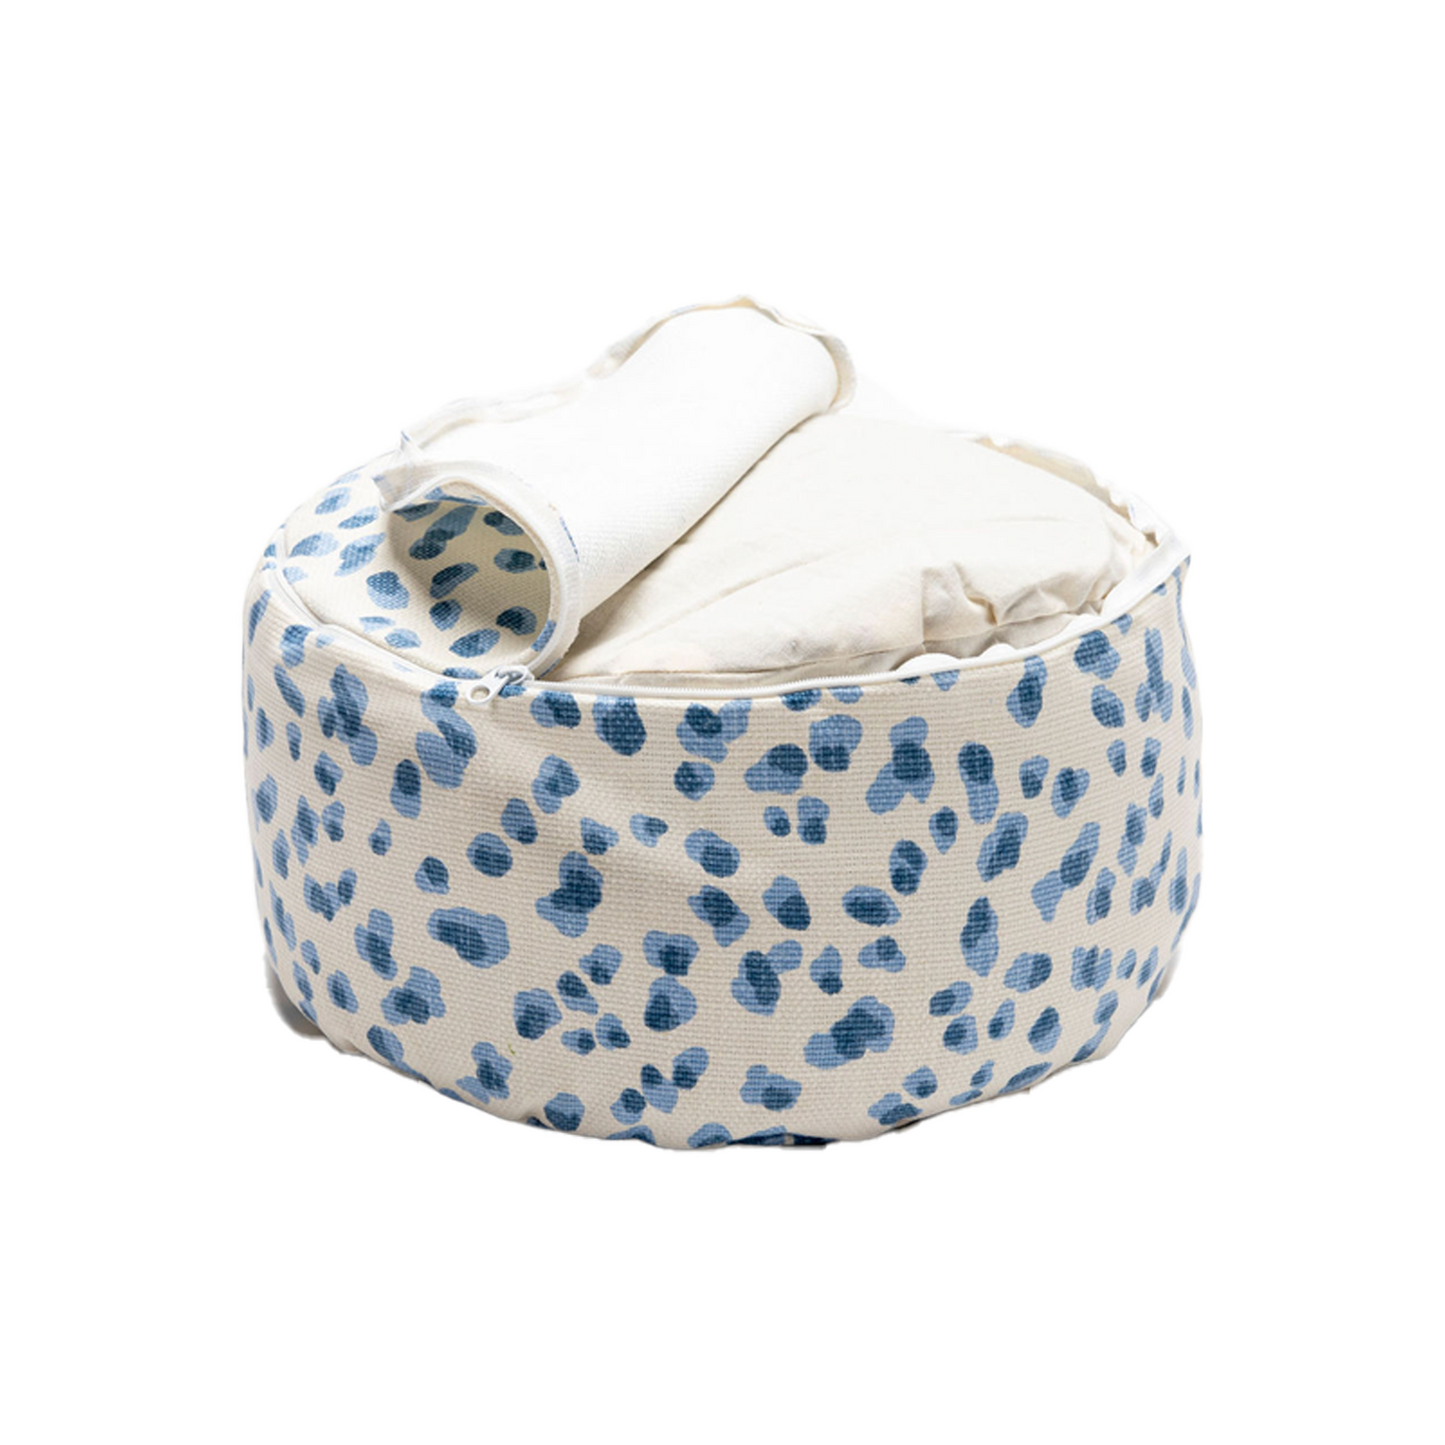 Polka Dot Hi-Zafu on white backdrop. The cover is unzipped and folded back partially to show the cushion inside.